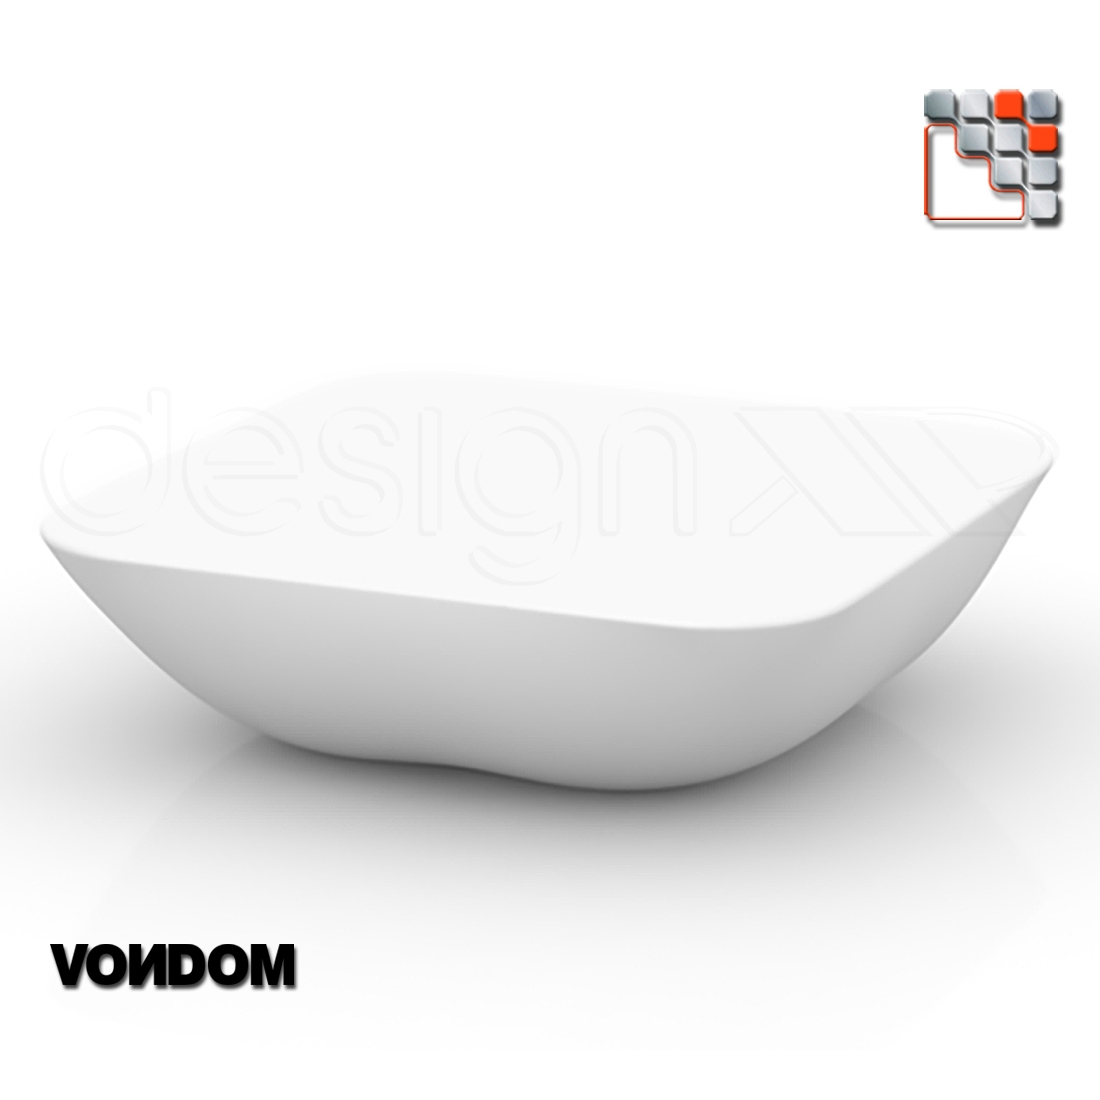 VONDOM Pillow Coffee Table V50-55002  Shade Sail - Outdoor Furnitures